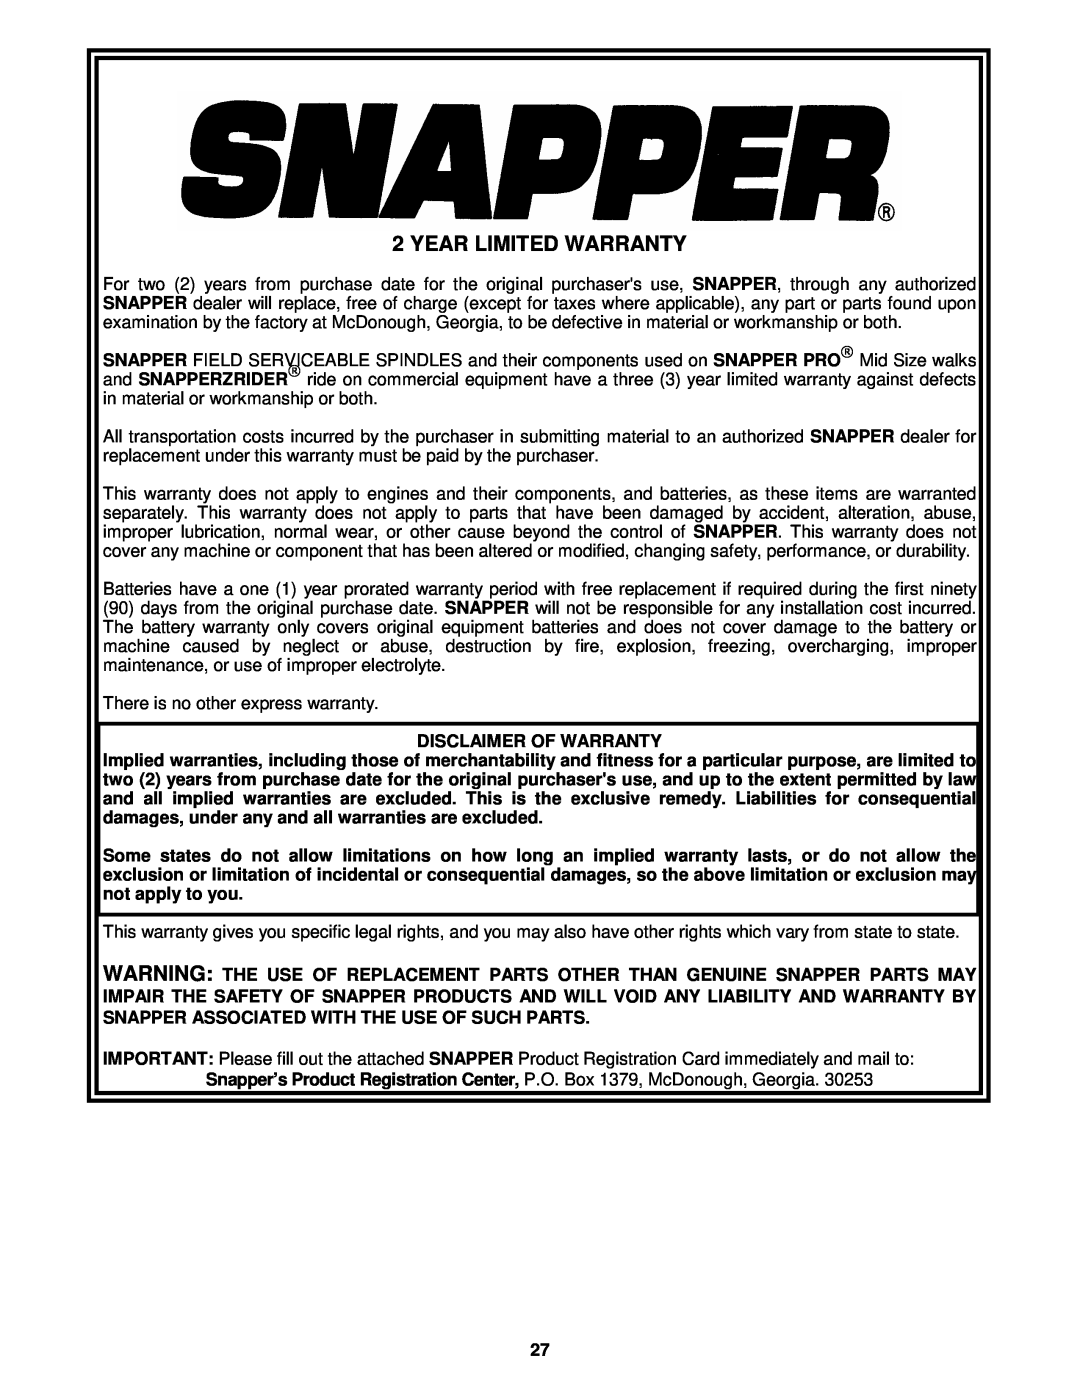 Snapper ZM5201M, ZM5201M, ZM6101M, ZM6101M, ZM2501KH, ZM5201M important safety instructions Year Limited Warranty 